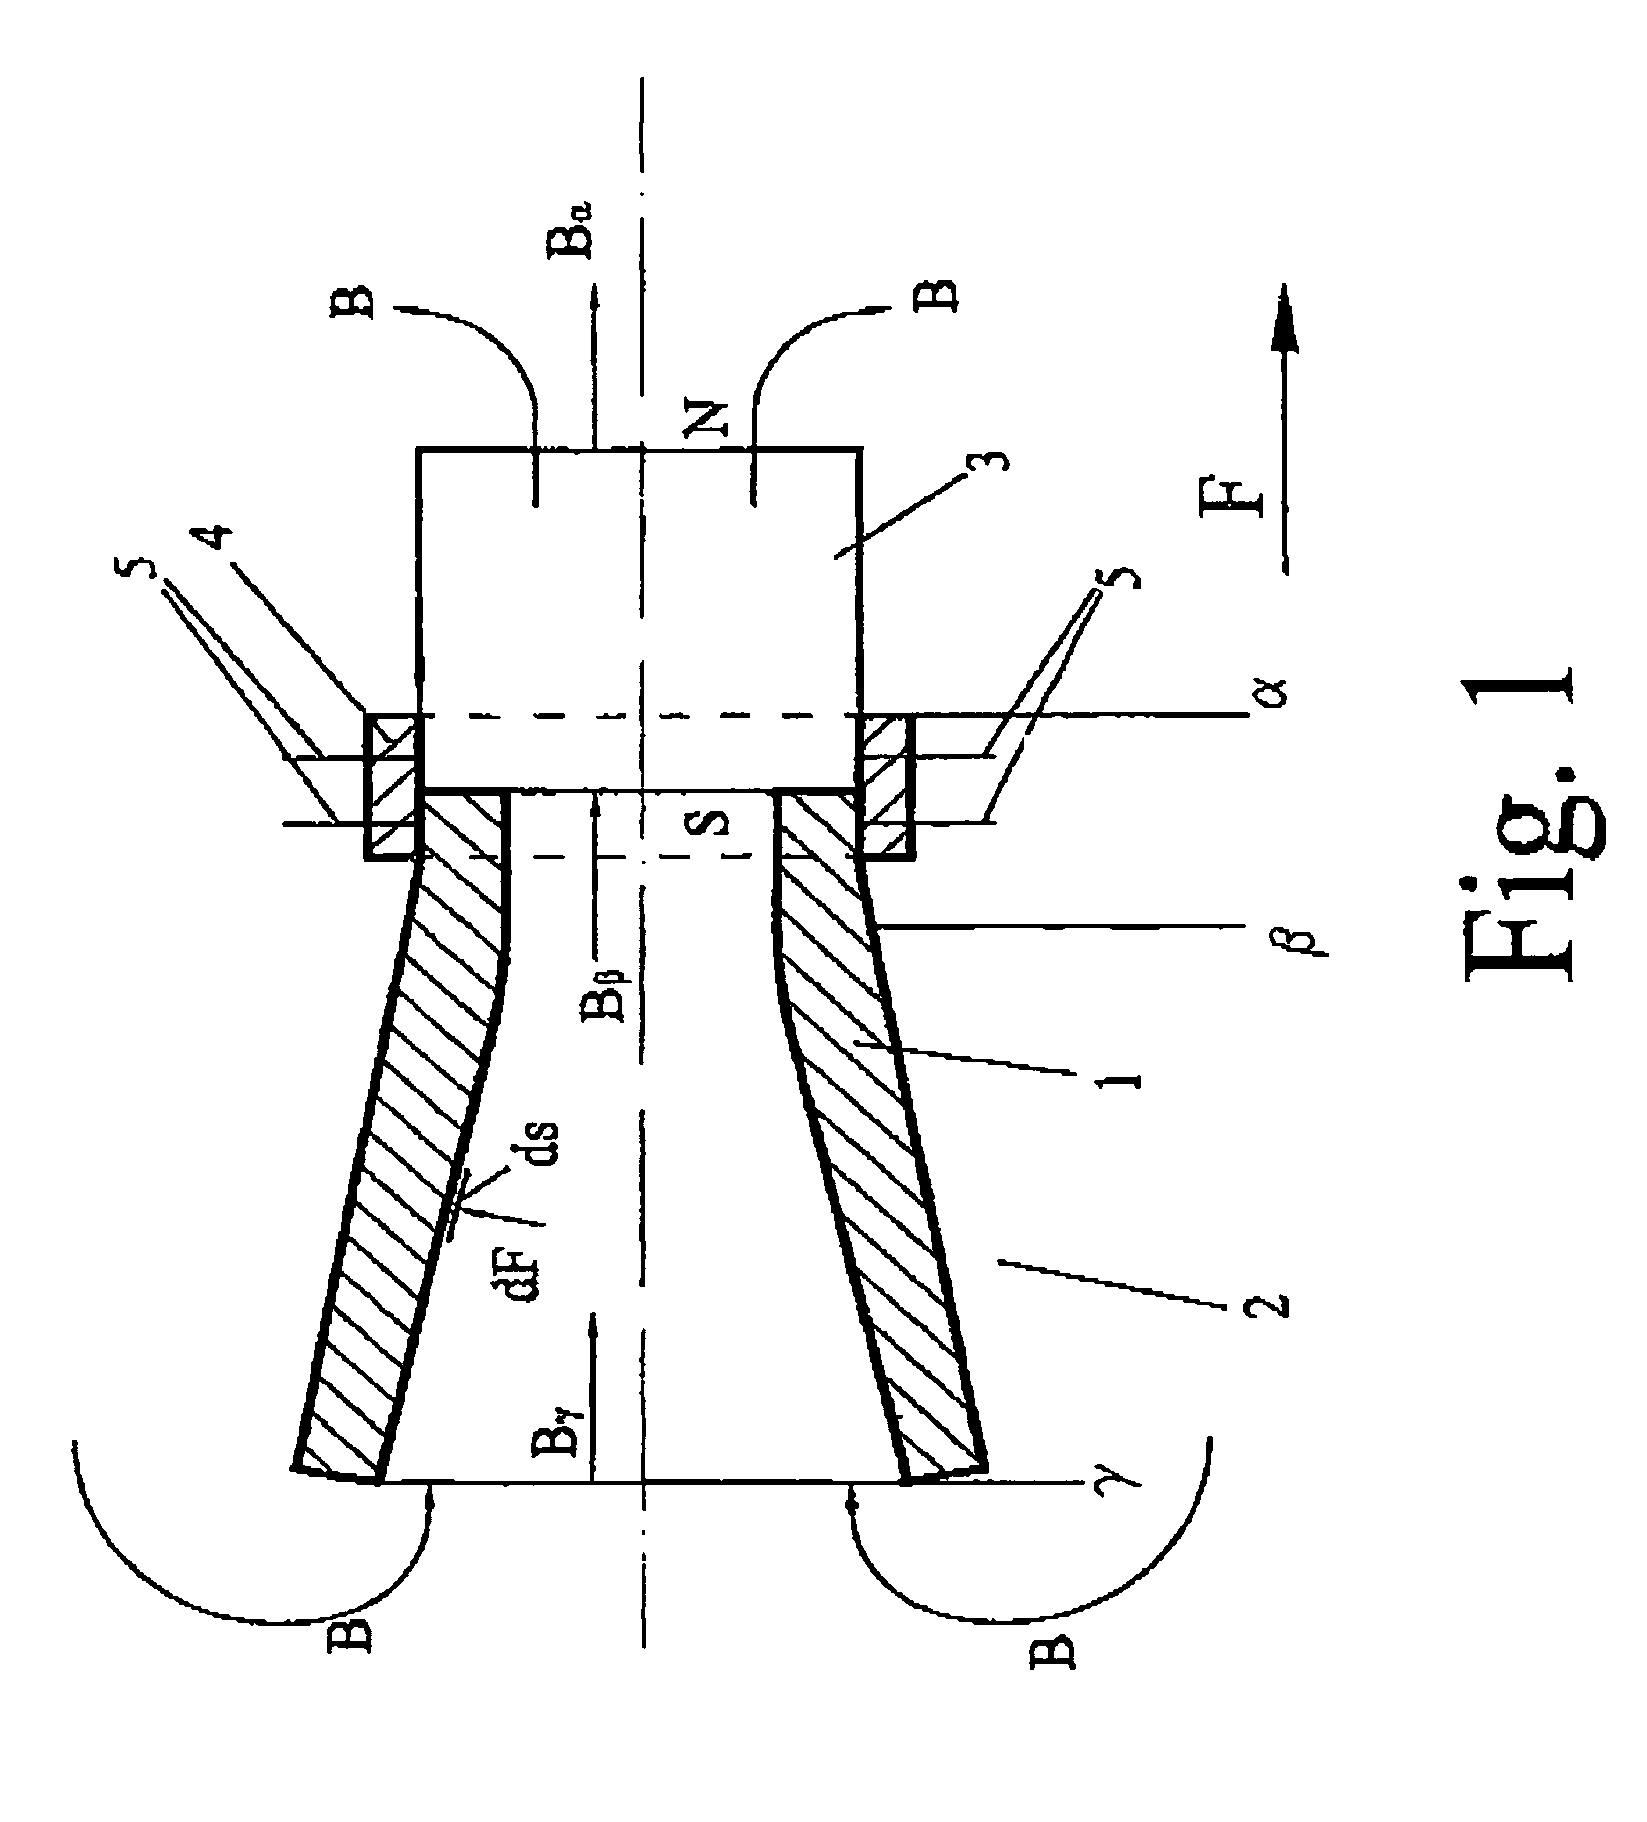 Magnetic propulsion device using superconductors